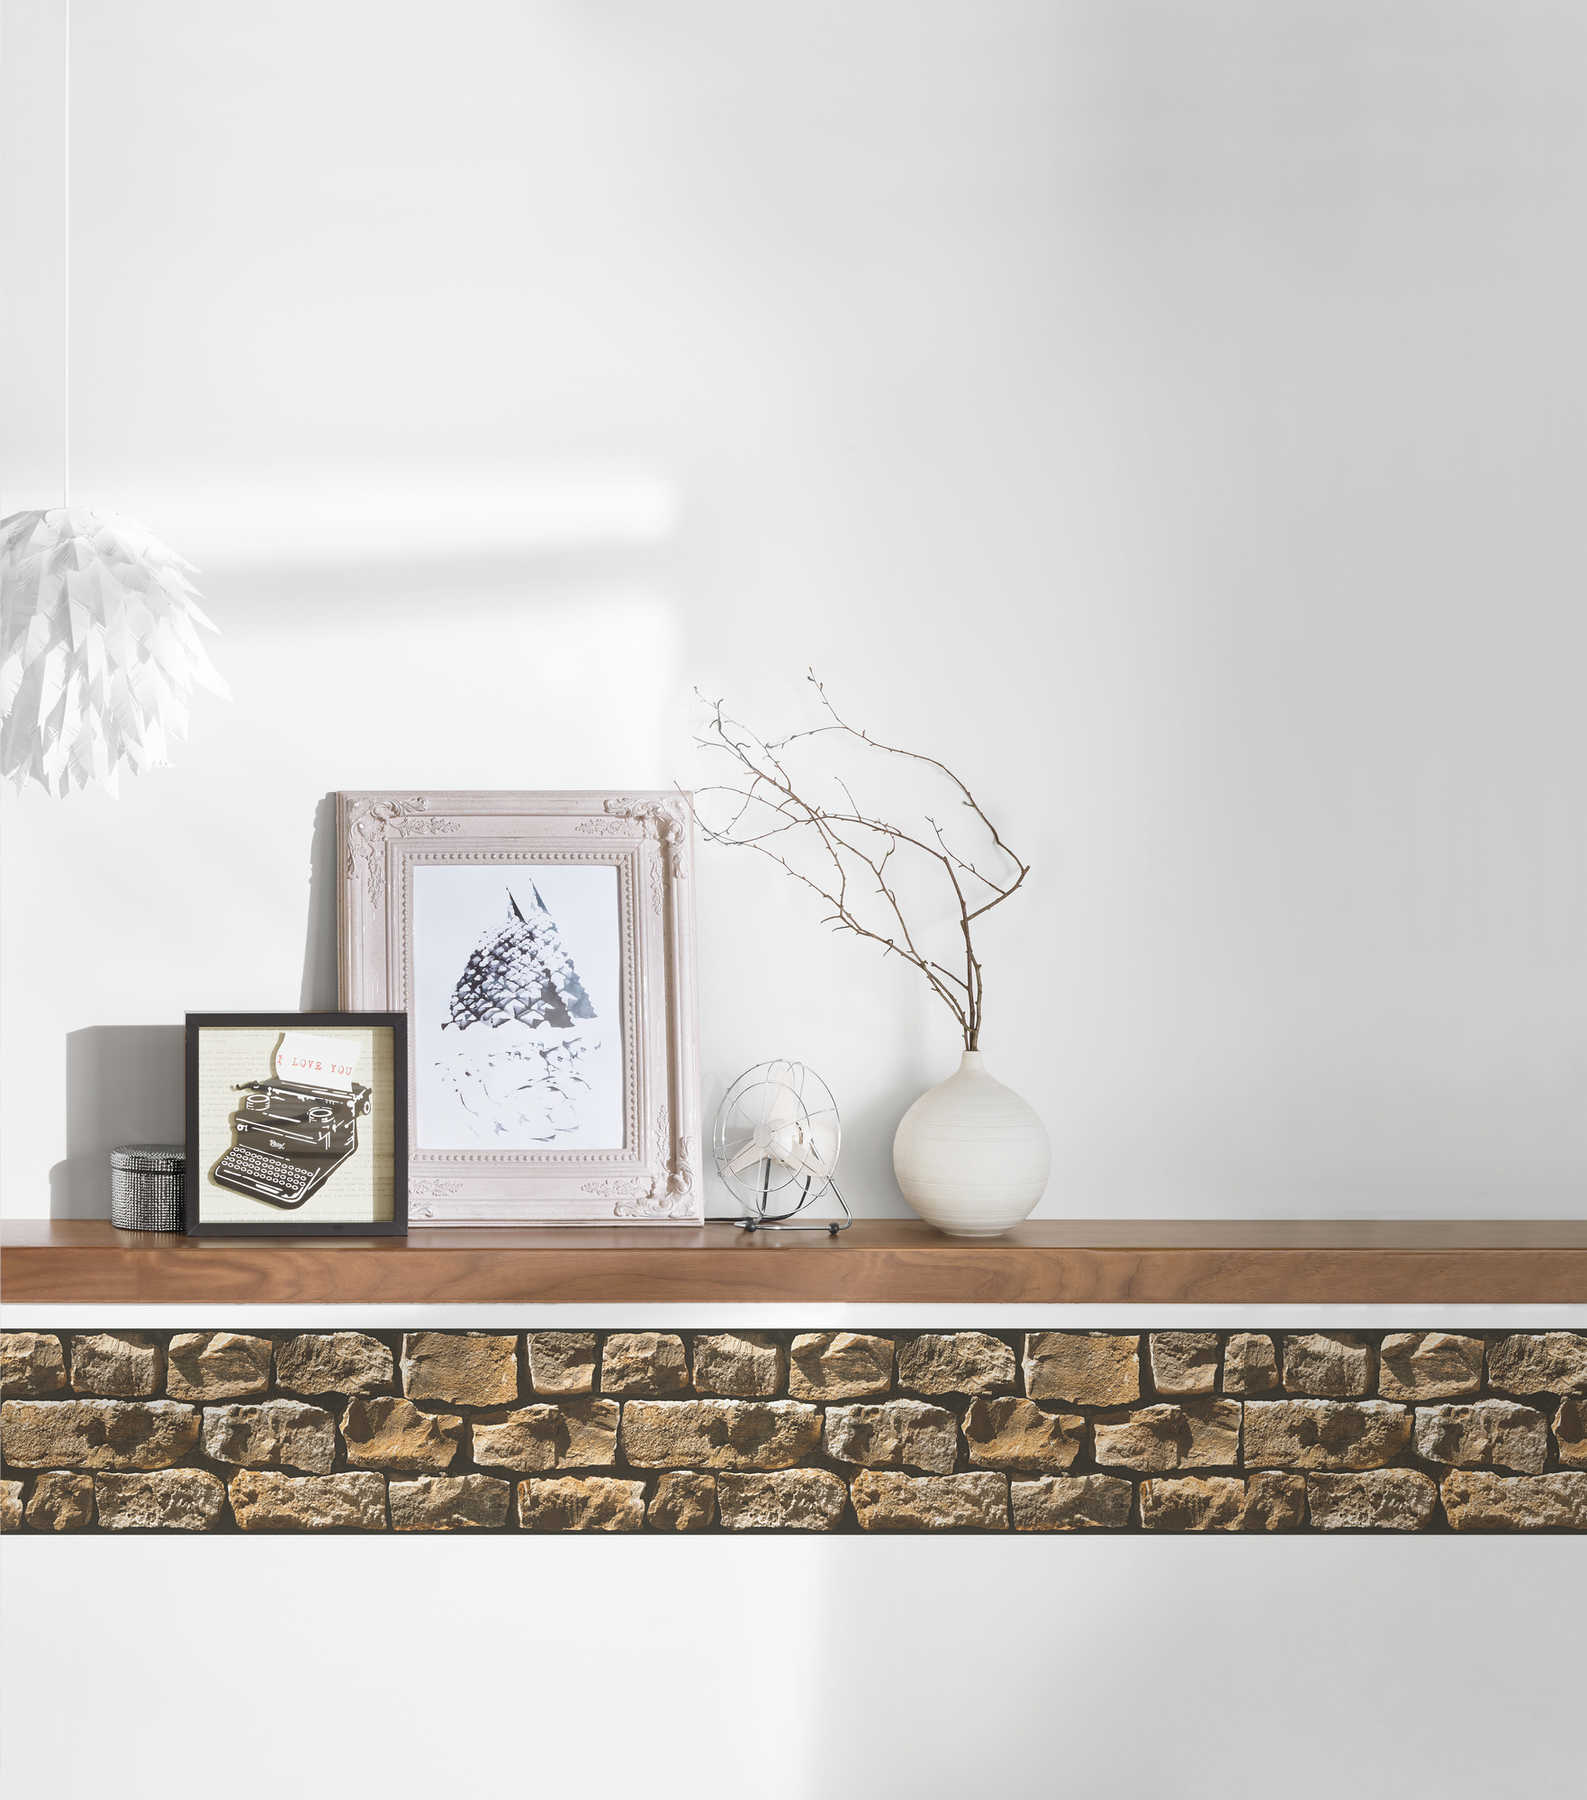             Stone look wallpaper border with 3D effect - beige, brown
        